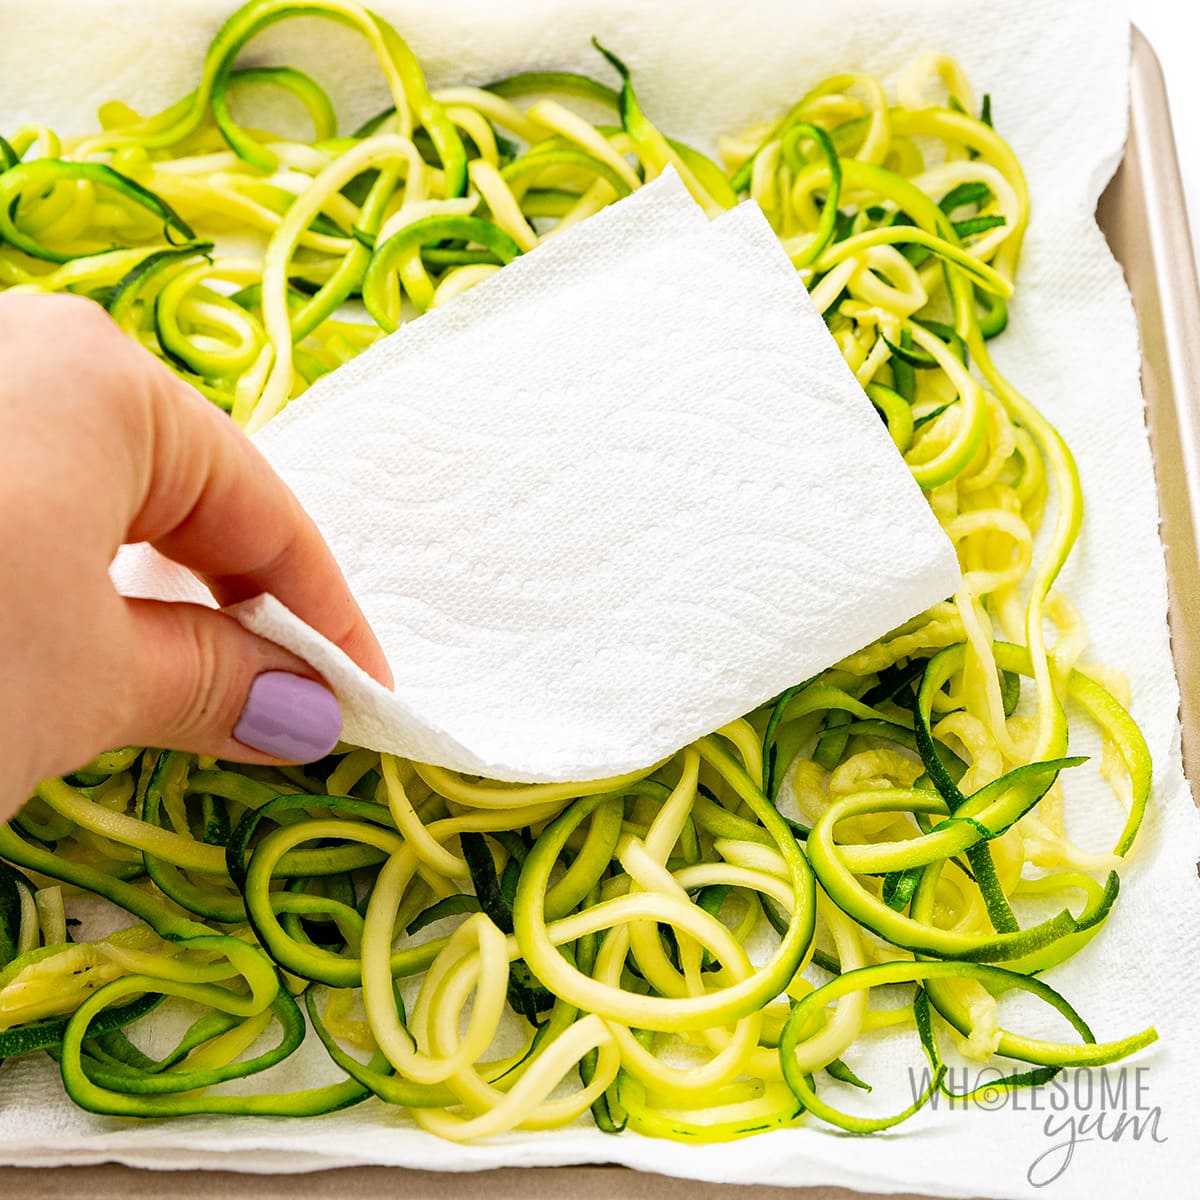 Patting zucchini noodles dry with paper towel.